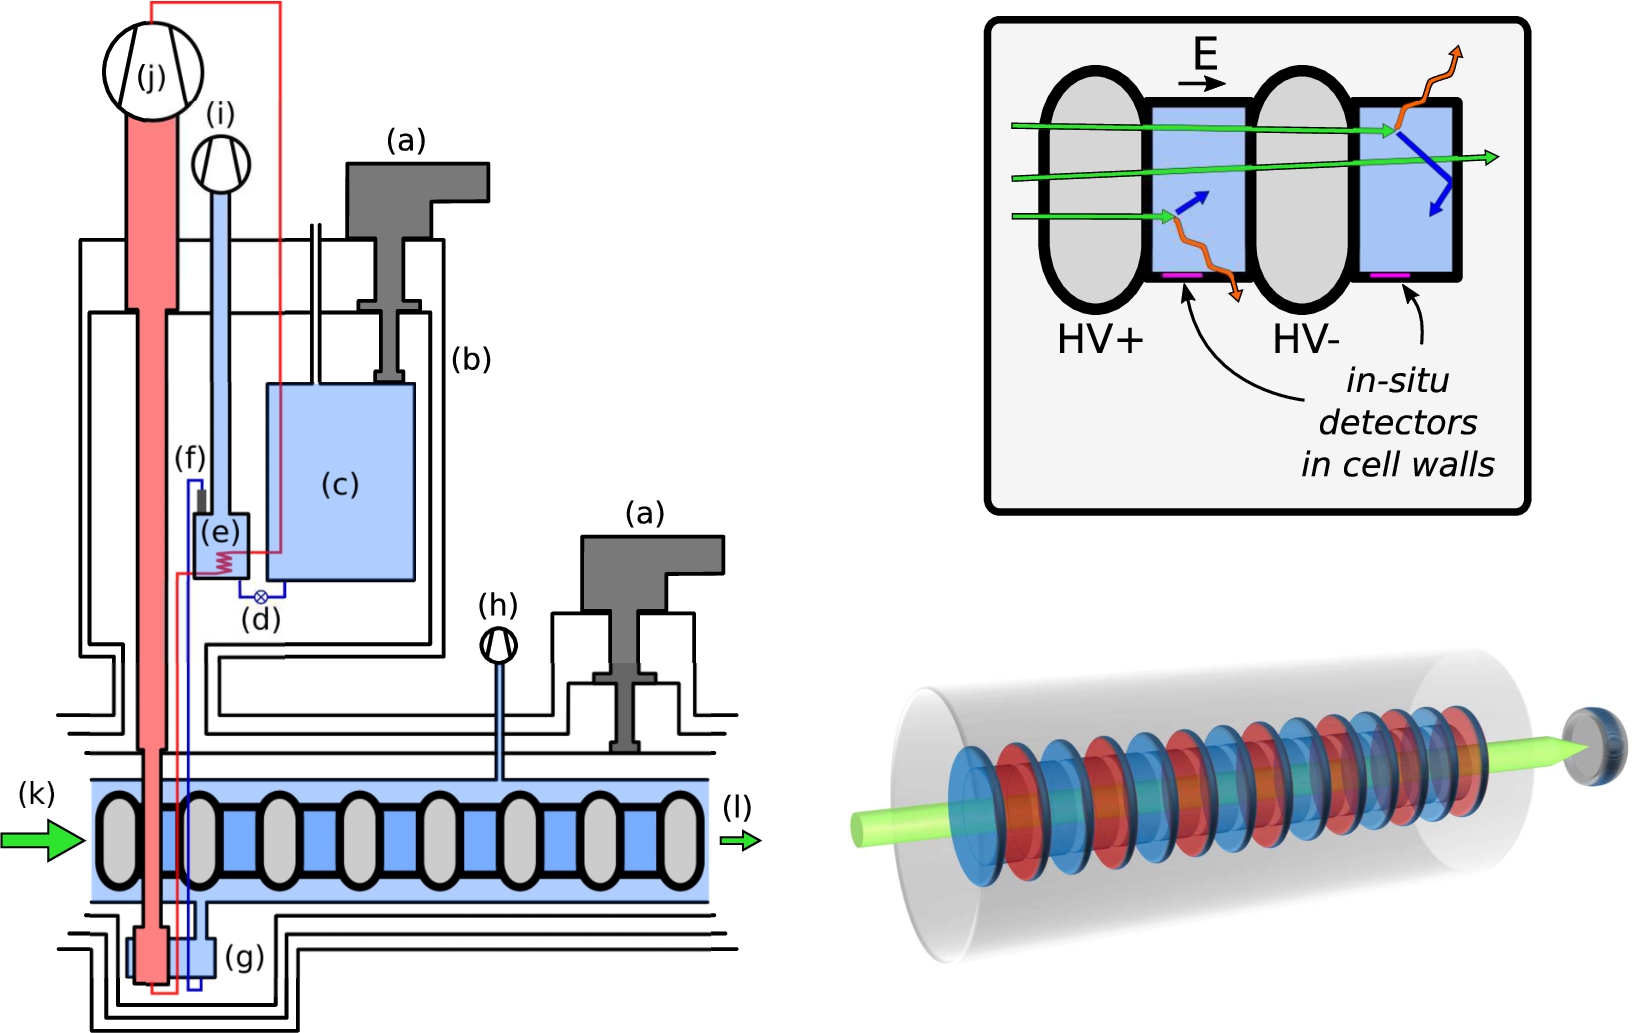 General concept of a multichamber in-situ UCN measurement. Left: Cryogenics apparatus based on the 3He refrigeration technology used for SuperSUN: (a) commercial cryocoolers, (b) vacuum vessel and thermal screens, (c) large-volume liquid-helium reserve at 4 K, (d) the needle valve for liquid-helium transfer to the 1-K pot, (e) 1-K pot with heat exchanger for pre-cooling of the 3He injection line, (f) superleak to extract superfluid 4He from the 1-K pot, (g) 3He/4He heat-exchanger to cool the superfluid, and superfluid delivery to the UCN convertor vessel, (h) pump to help achieve low temperature in the convertor vessel, (i) 4He pumps for the 1-K pot, (j) 3He pumps for cooling the heat exchanger, (k) polarized cold neutron beam incident on cells in the convertor vessel, (l) attenuated neutron beam exits the multicell stack. Elements such as magnetic shields or high-voltage that are needed specifically for the neutron EDM have been suppressed for clarity; we focus here on the possibility for statistical gains. Right top: UCN production within the measurement cells for a neutron EDM experiment. Right bottom: Three-dimensional artistic view of a multicell stack being illuminated by a beam, the remainder of which passes into a downstream monitor detector.